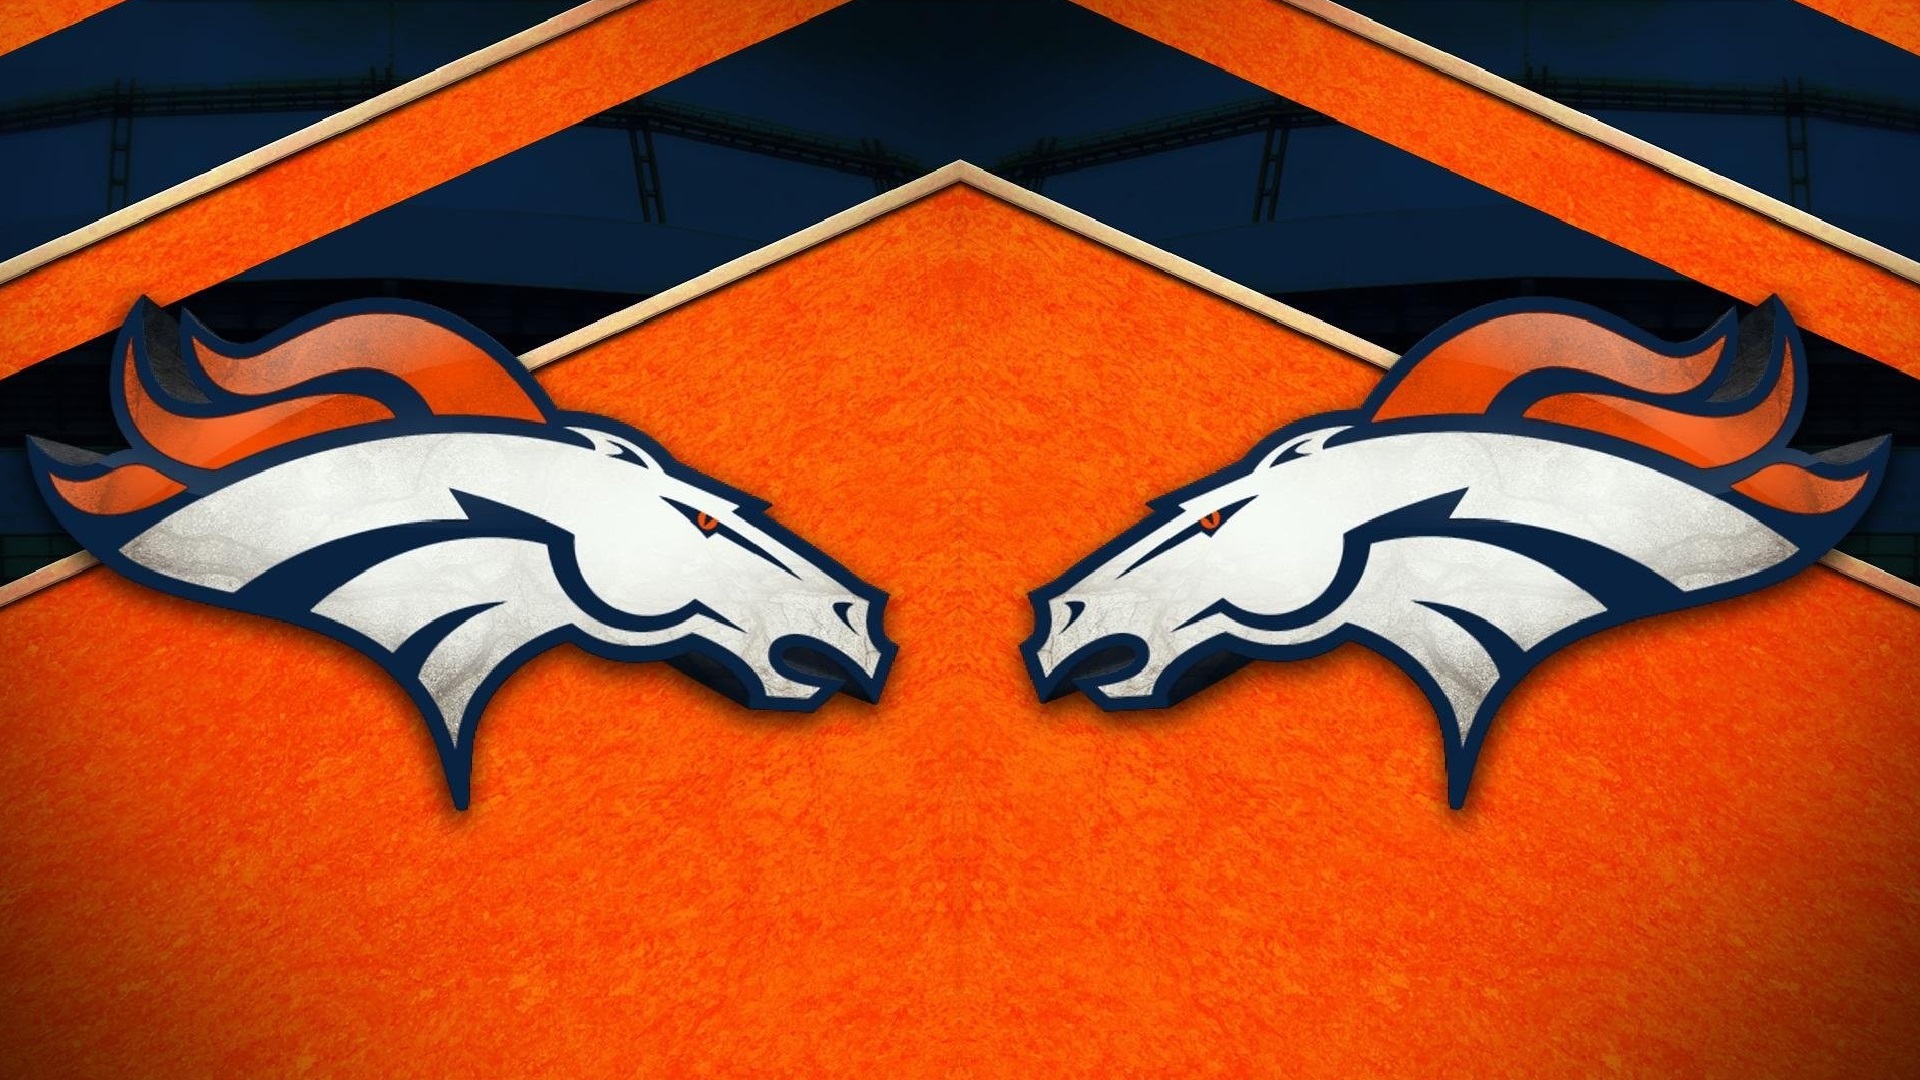 PC Wallpaper Denver Broncos With high-resolution 1920X1080 pixel. Download and set as wallpaper for Desktop Computer, Apple iPhone X, XS Max, XR, 8, 7, 6, SE, iPad, Android